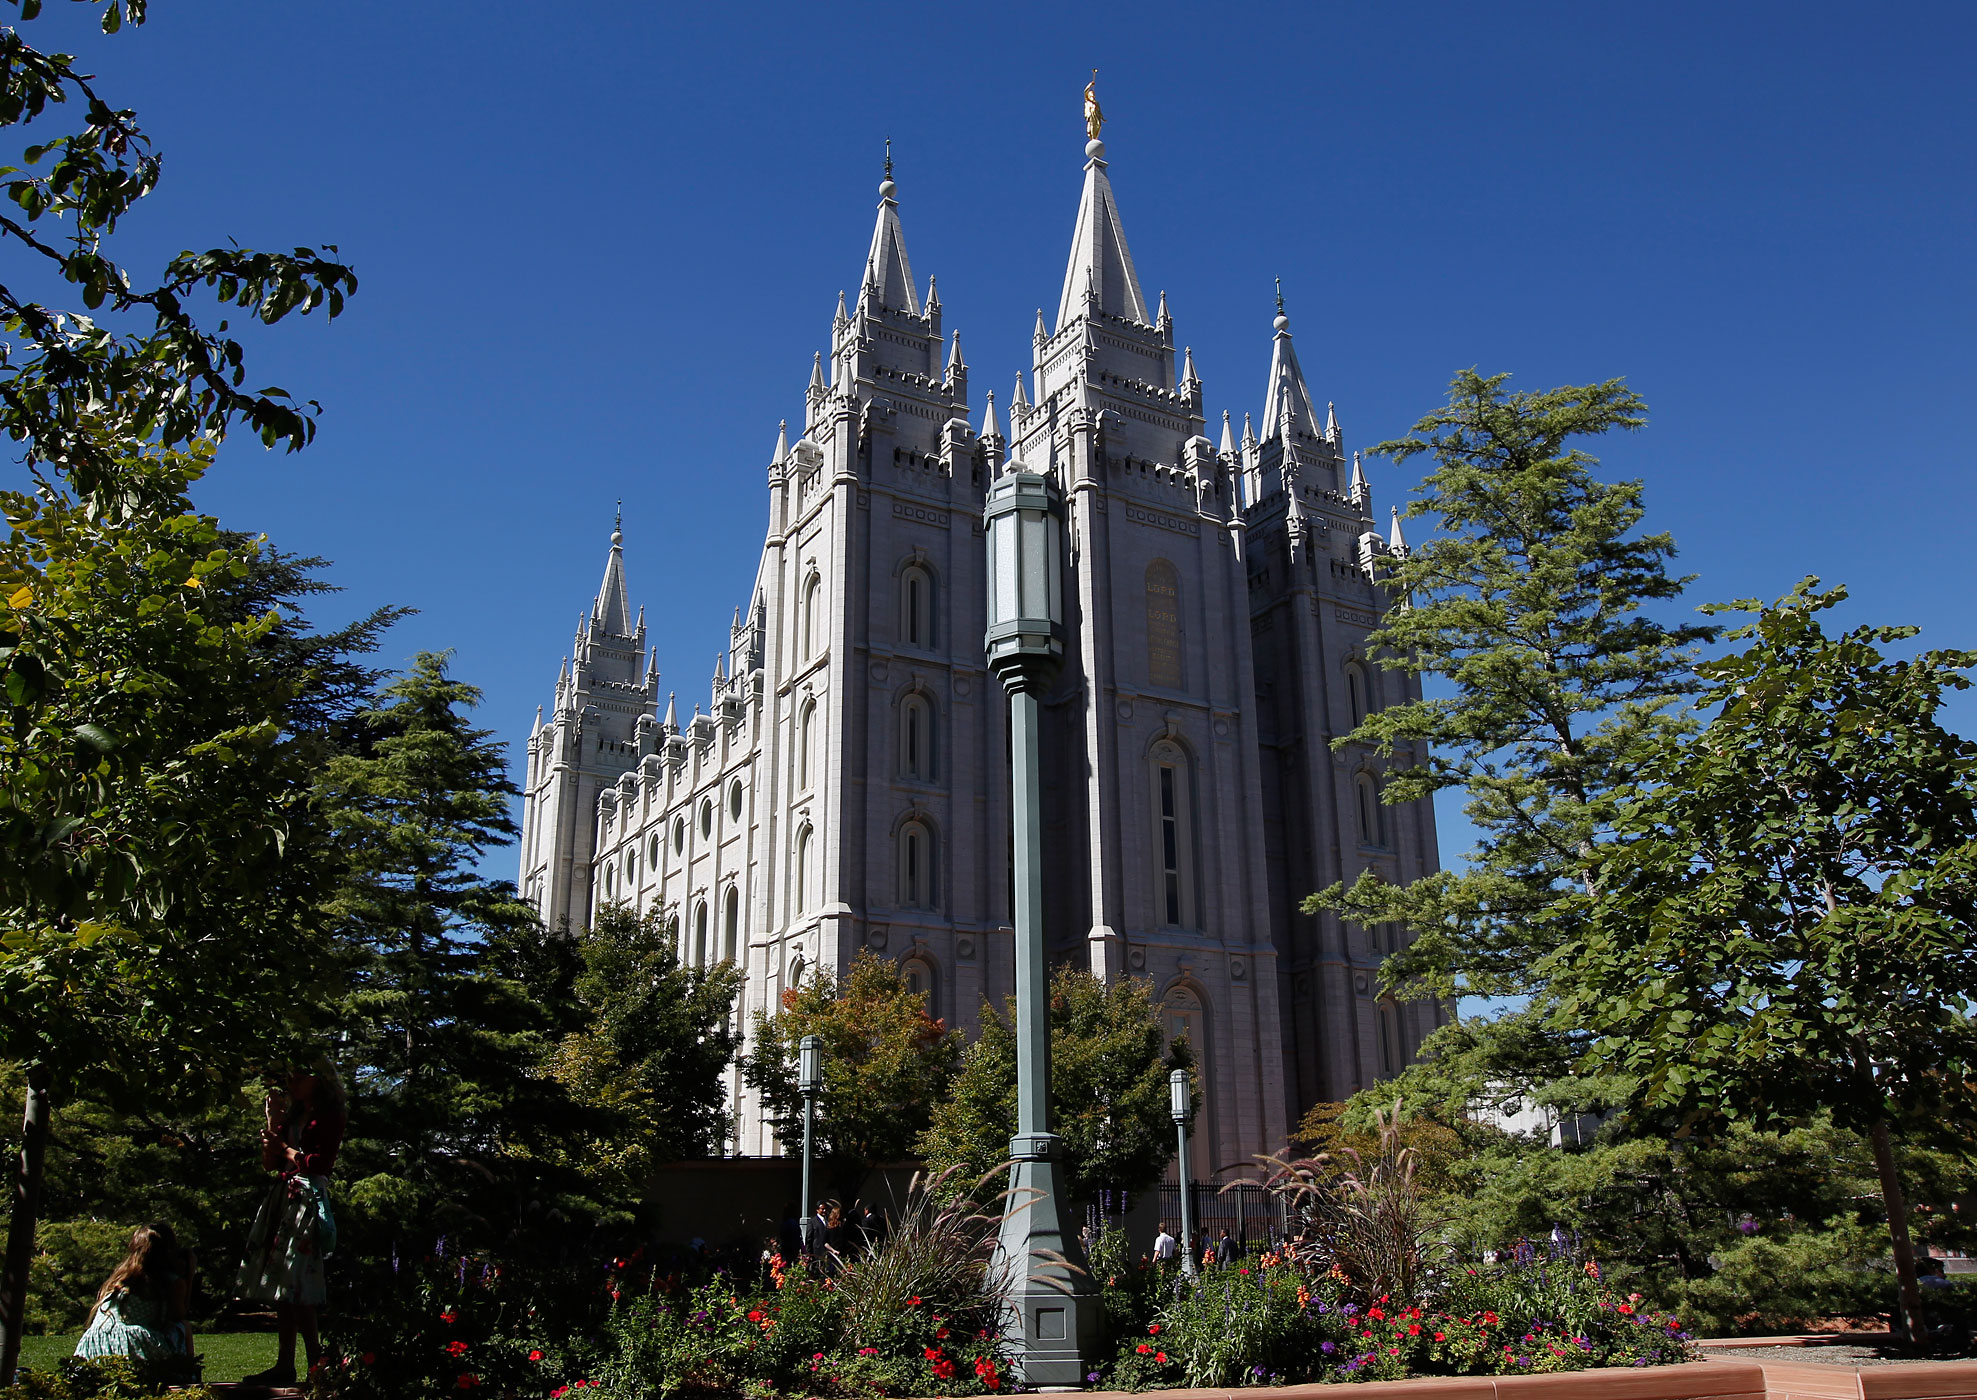 The Salt Lake Temple is seen during the 184th Semiannual General Conference of the Church of Jesus Christ of Latter-Day Saints on Oct. 4, 2014 in Salt Lake City, Utah. (George Frey—Getty Images)